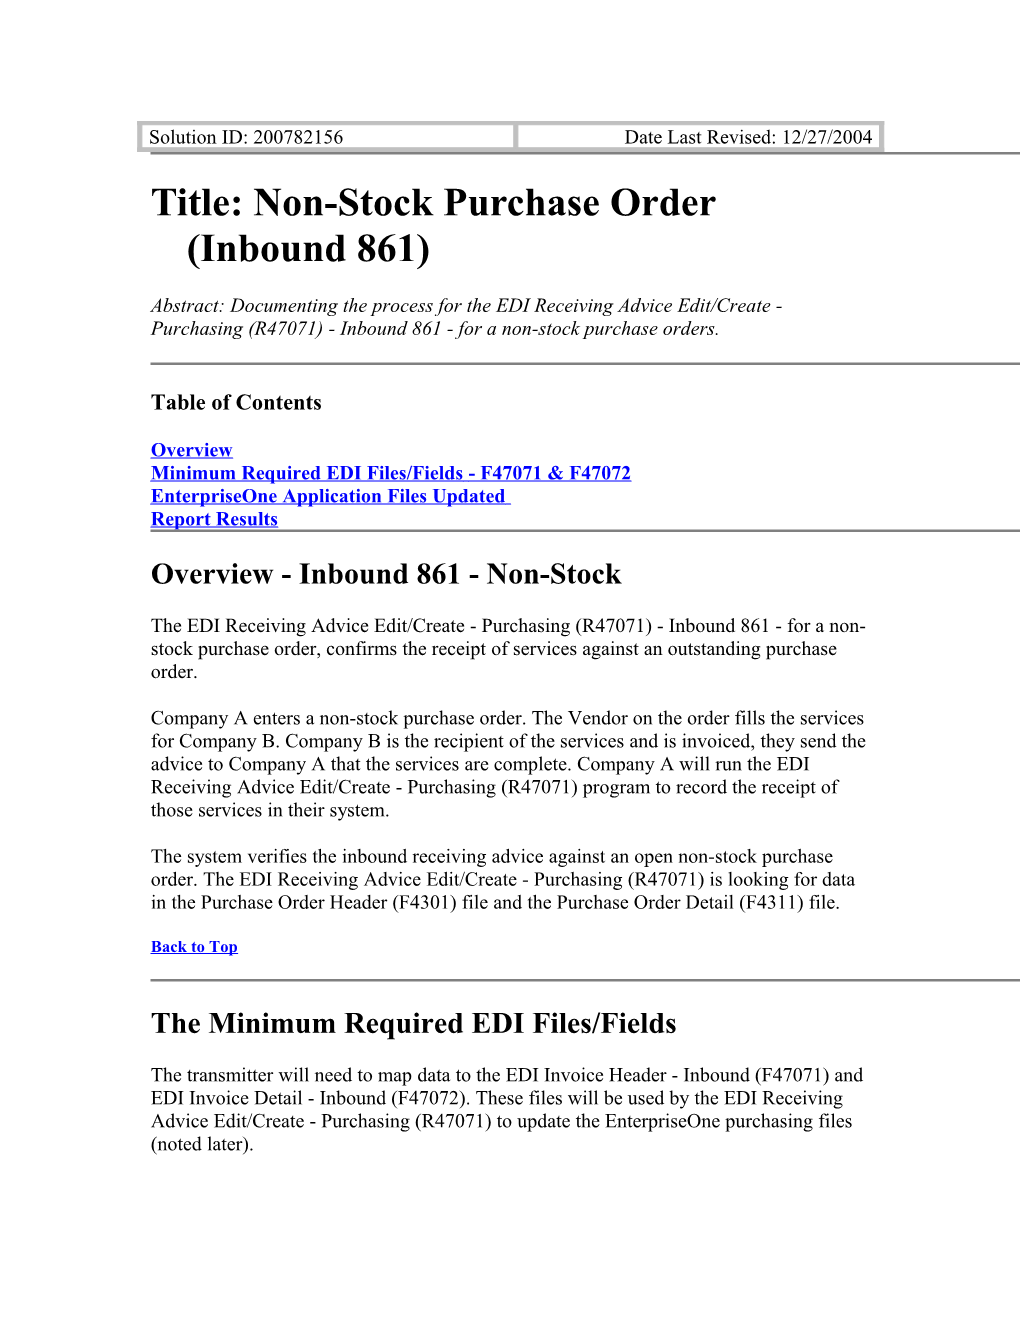 Title: Non-Stock Purchase Order (Inbound 861)